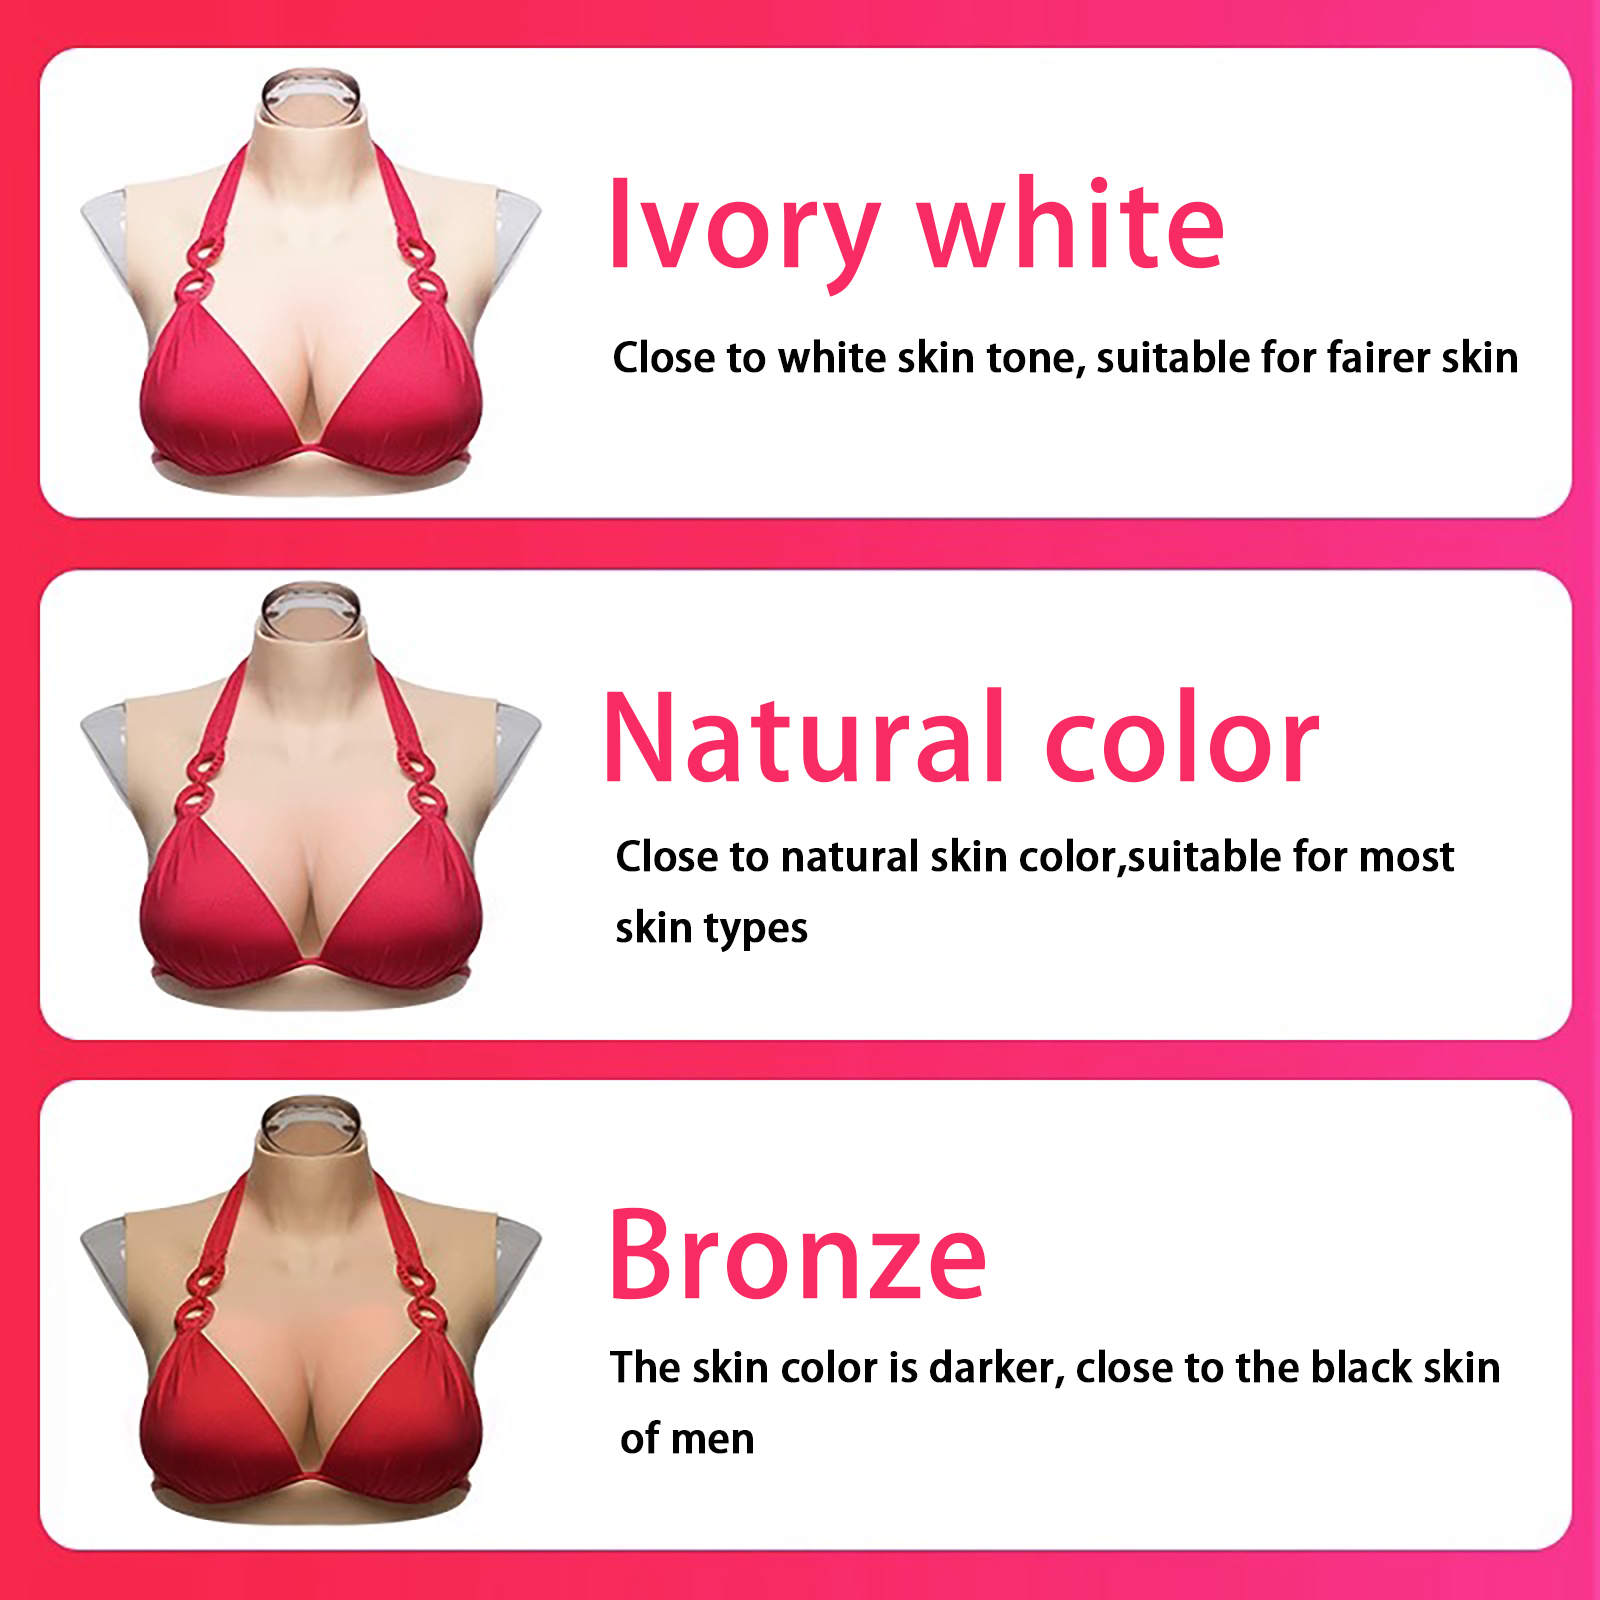 D Cup high neck silicone breasts